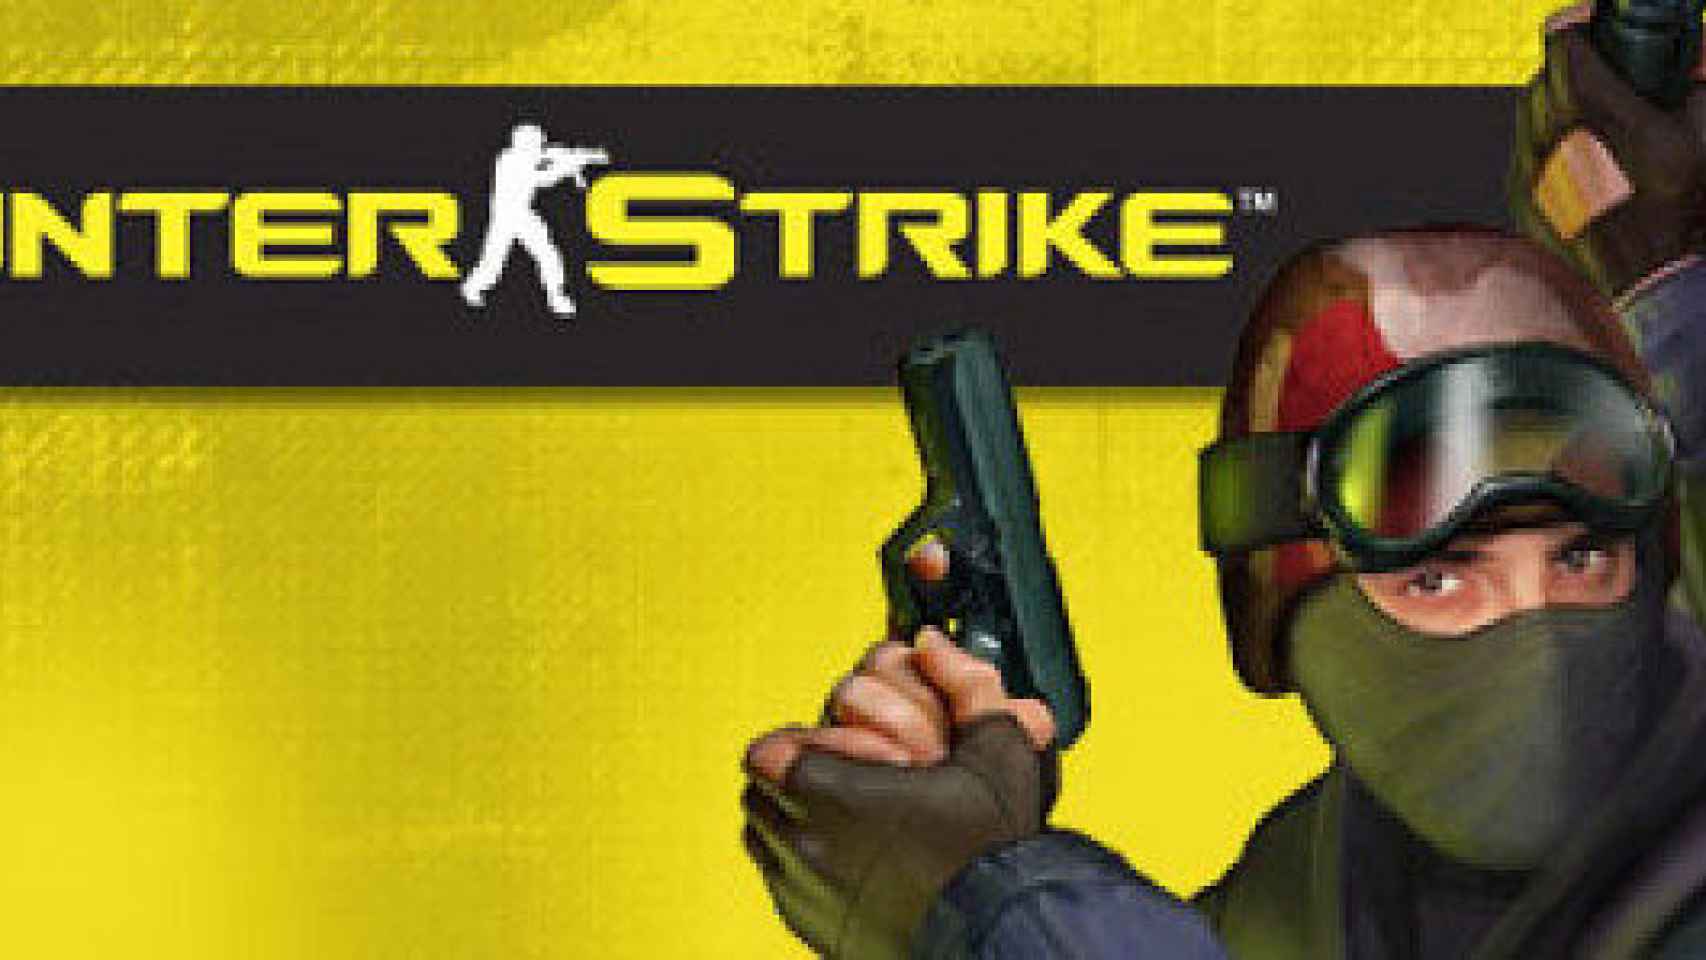 Fire in the hole: Tendremos Counterstrike para Android, aunque no será oficial